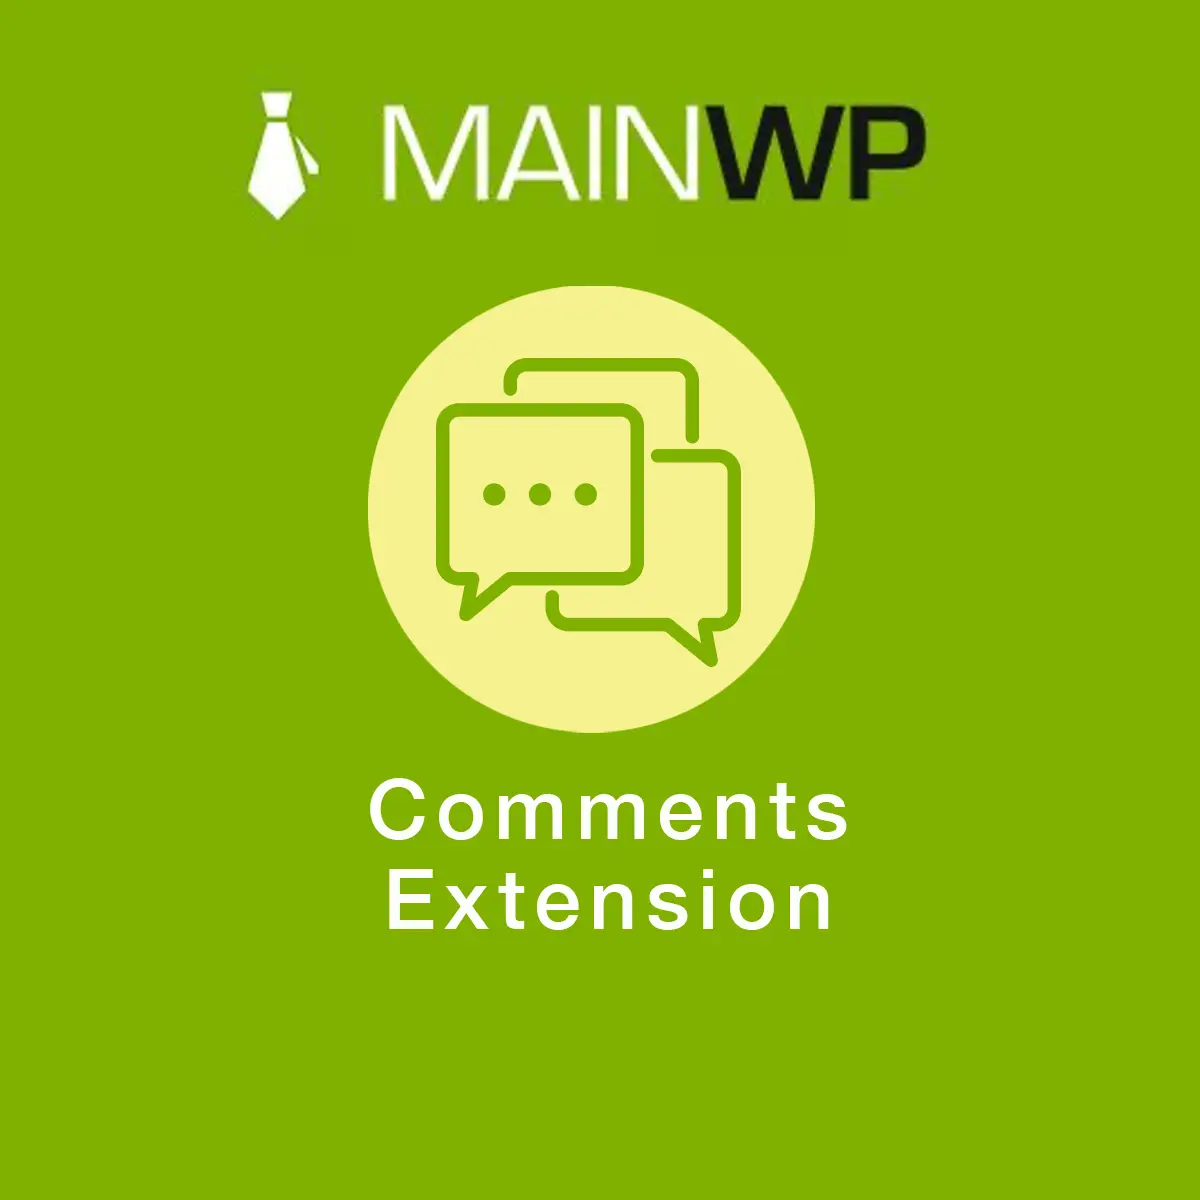 Download MainWP Comments Extension